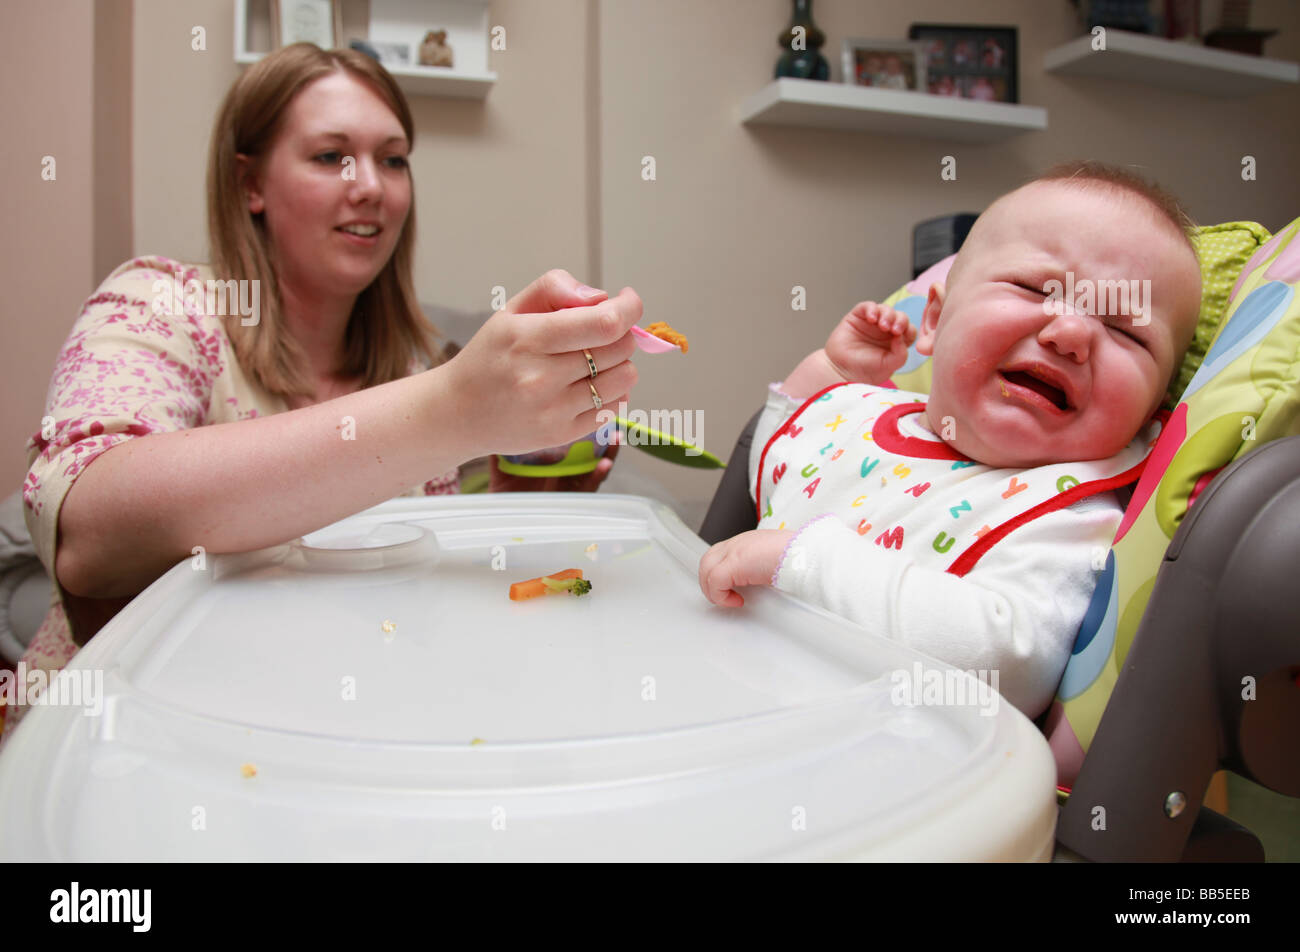 8 month old baby girl refusing to eat from spoon Stock Photo